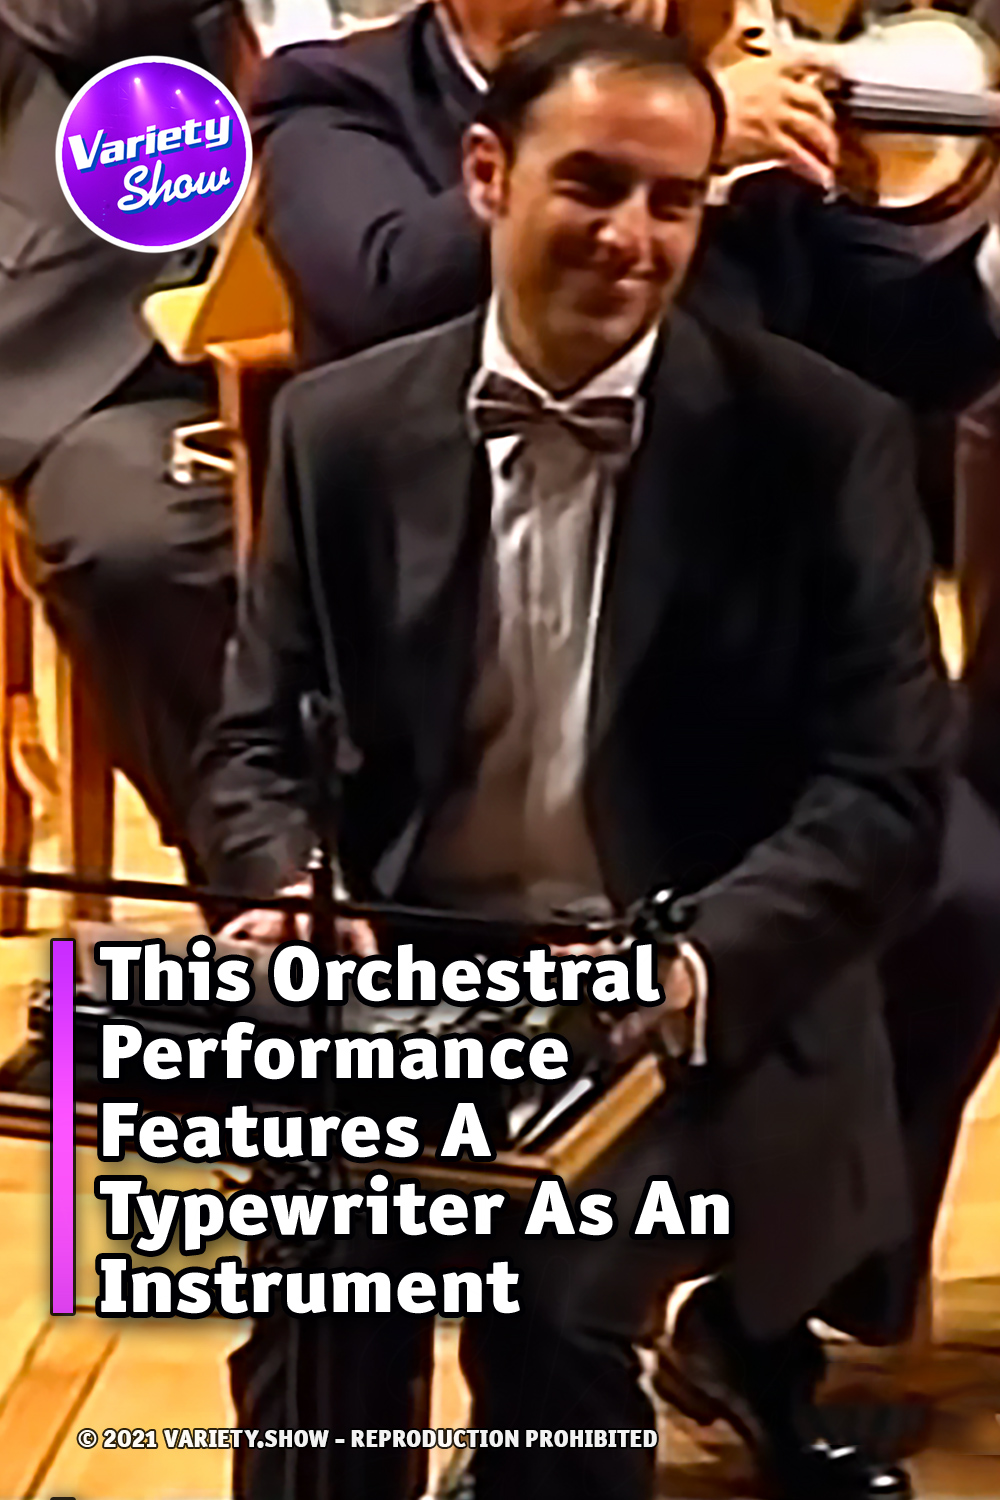 This Orchestral Performance Features A Typewriter As An Instrument